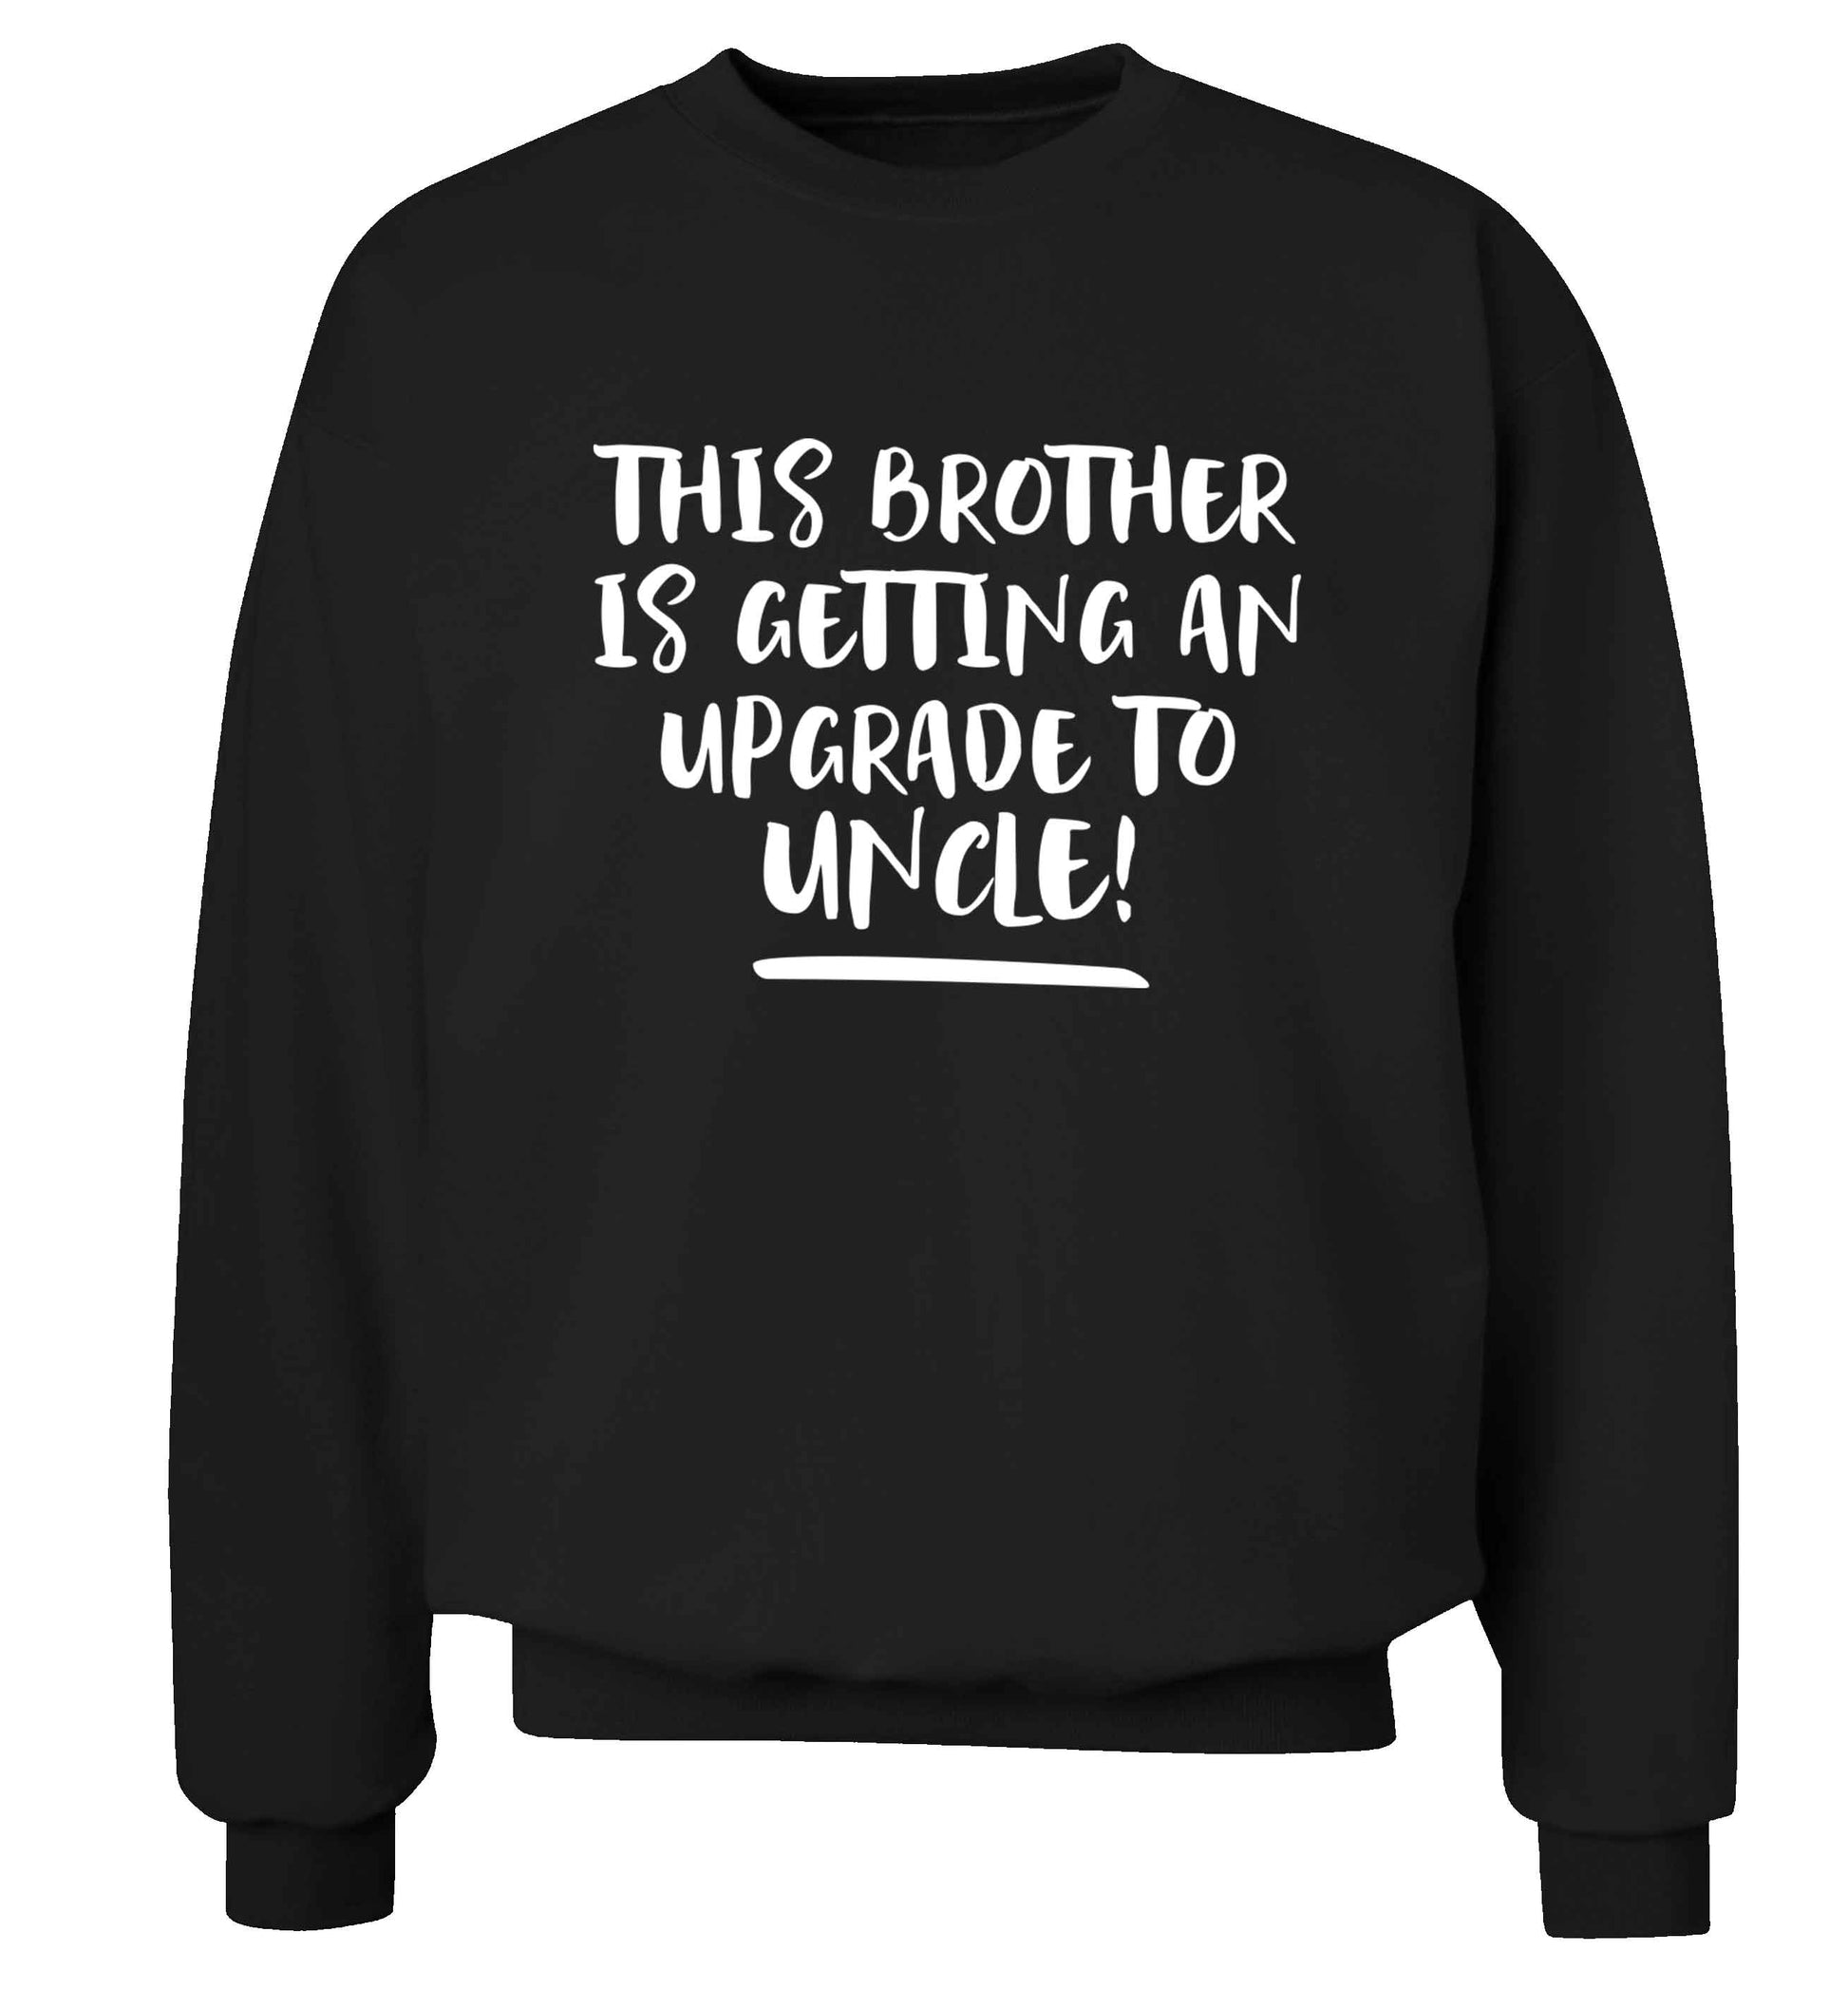 This brother is getting an upgrade to uncle! Adult's unisex black Sweater 2XL